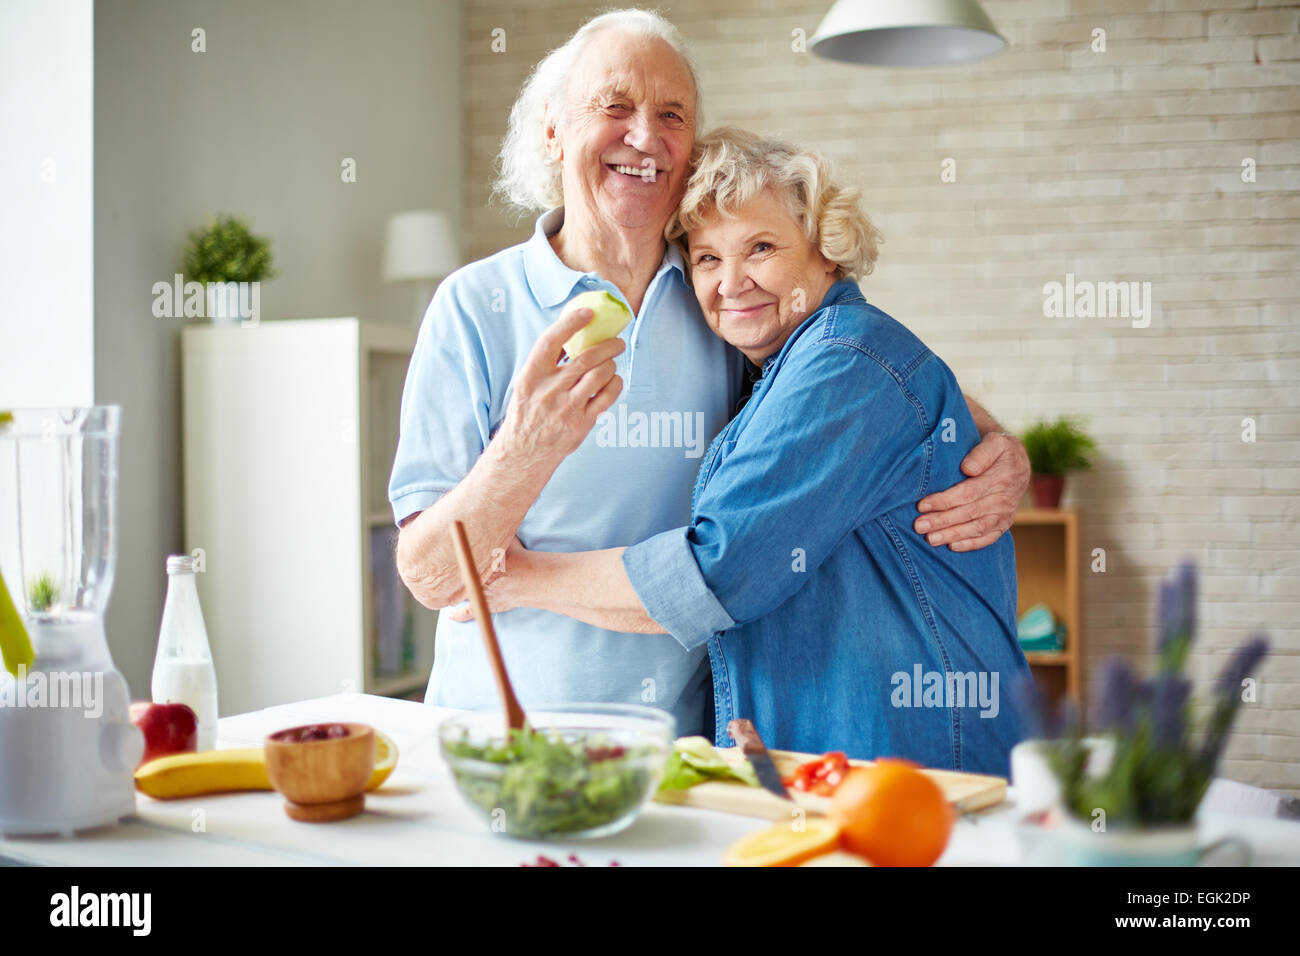 Affectionate seniors in embrace looking at camera Stock Photo